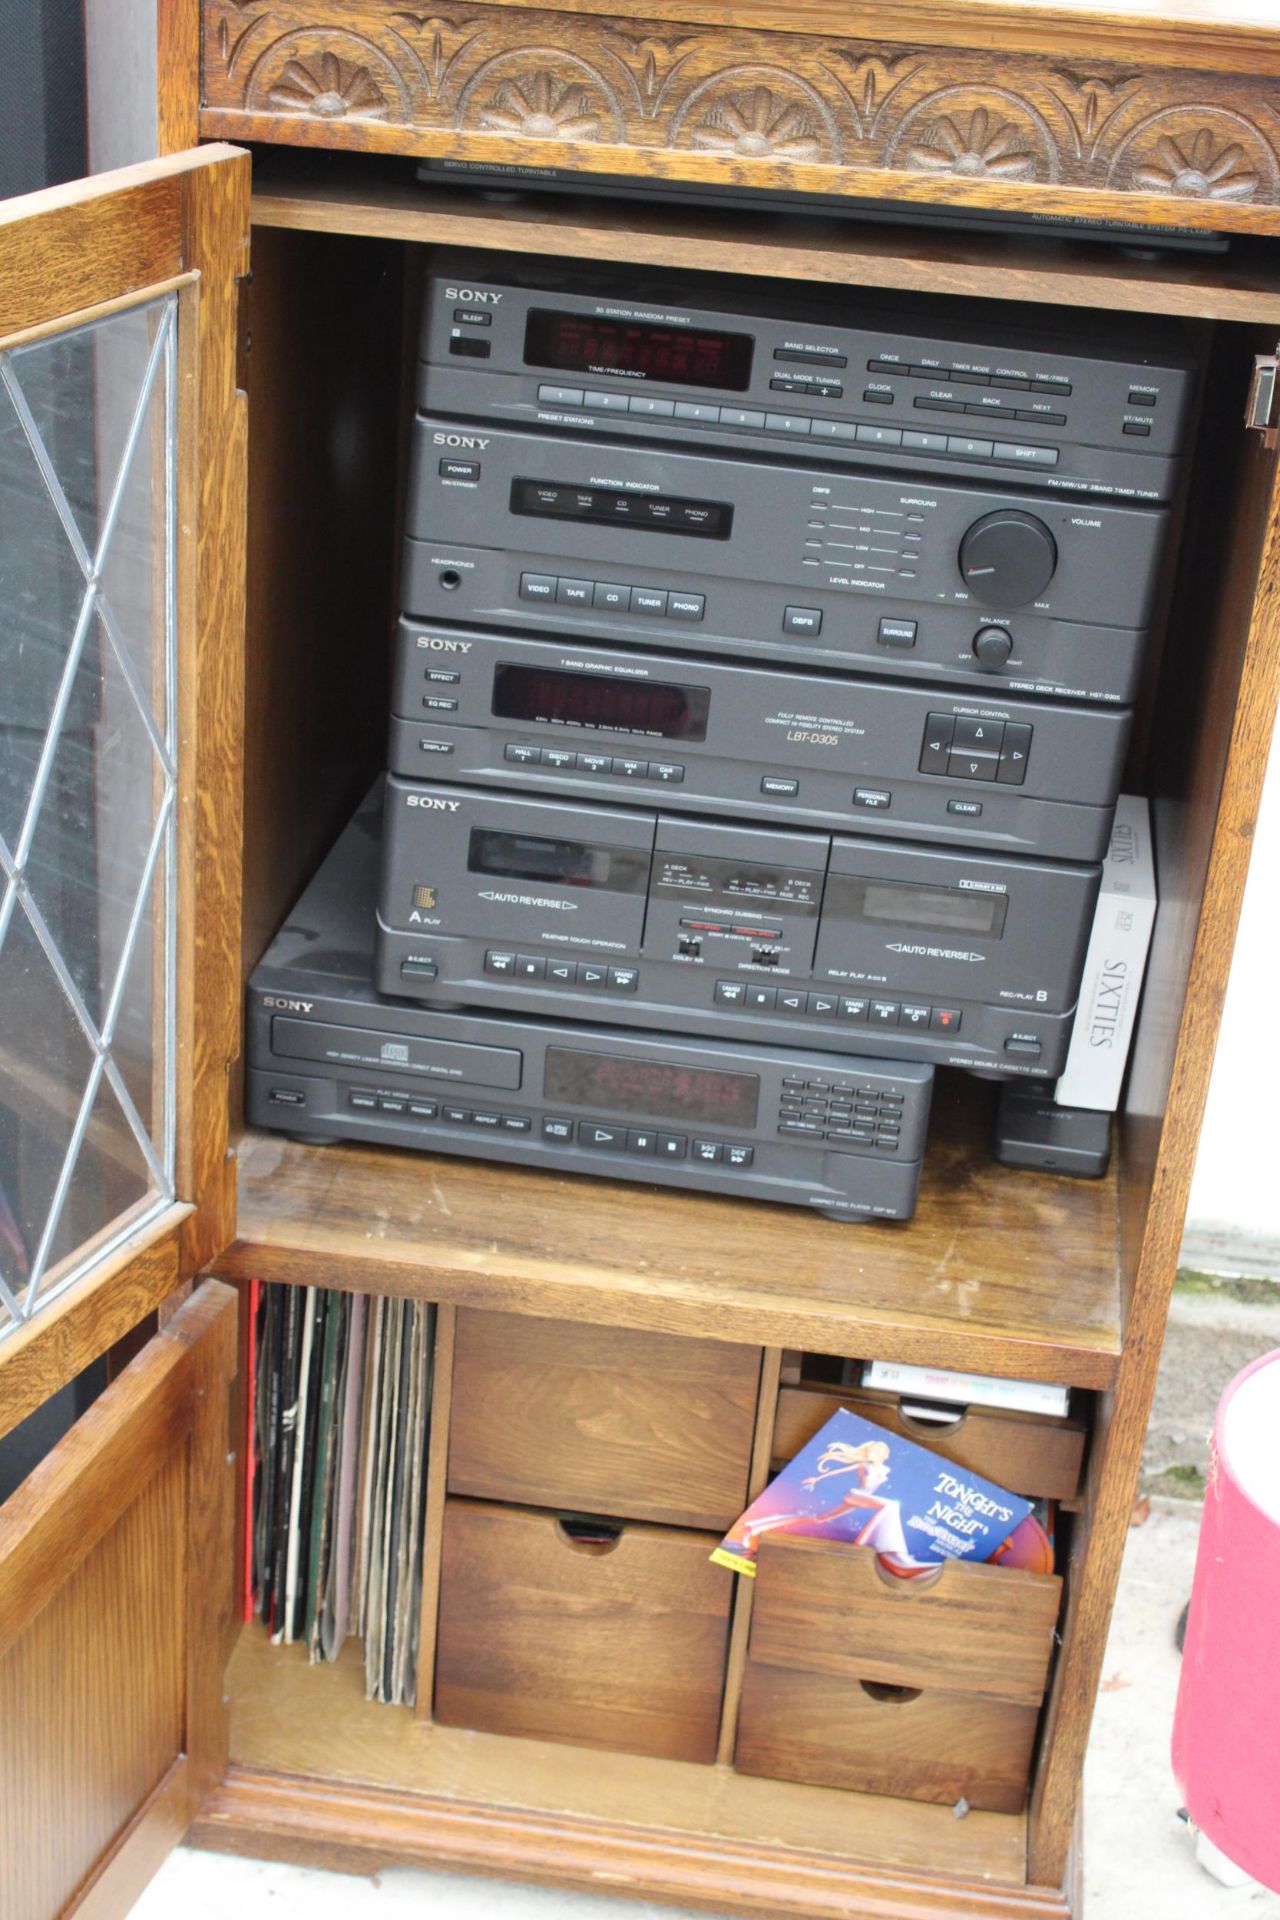 AN OAK RECORD CABINET CONTAINING A SONY COMPACT HI-FI STEREO SYSTEM - Image 2 of 3